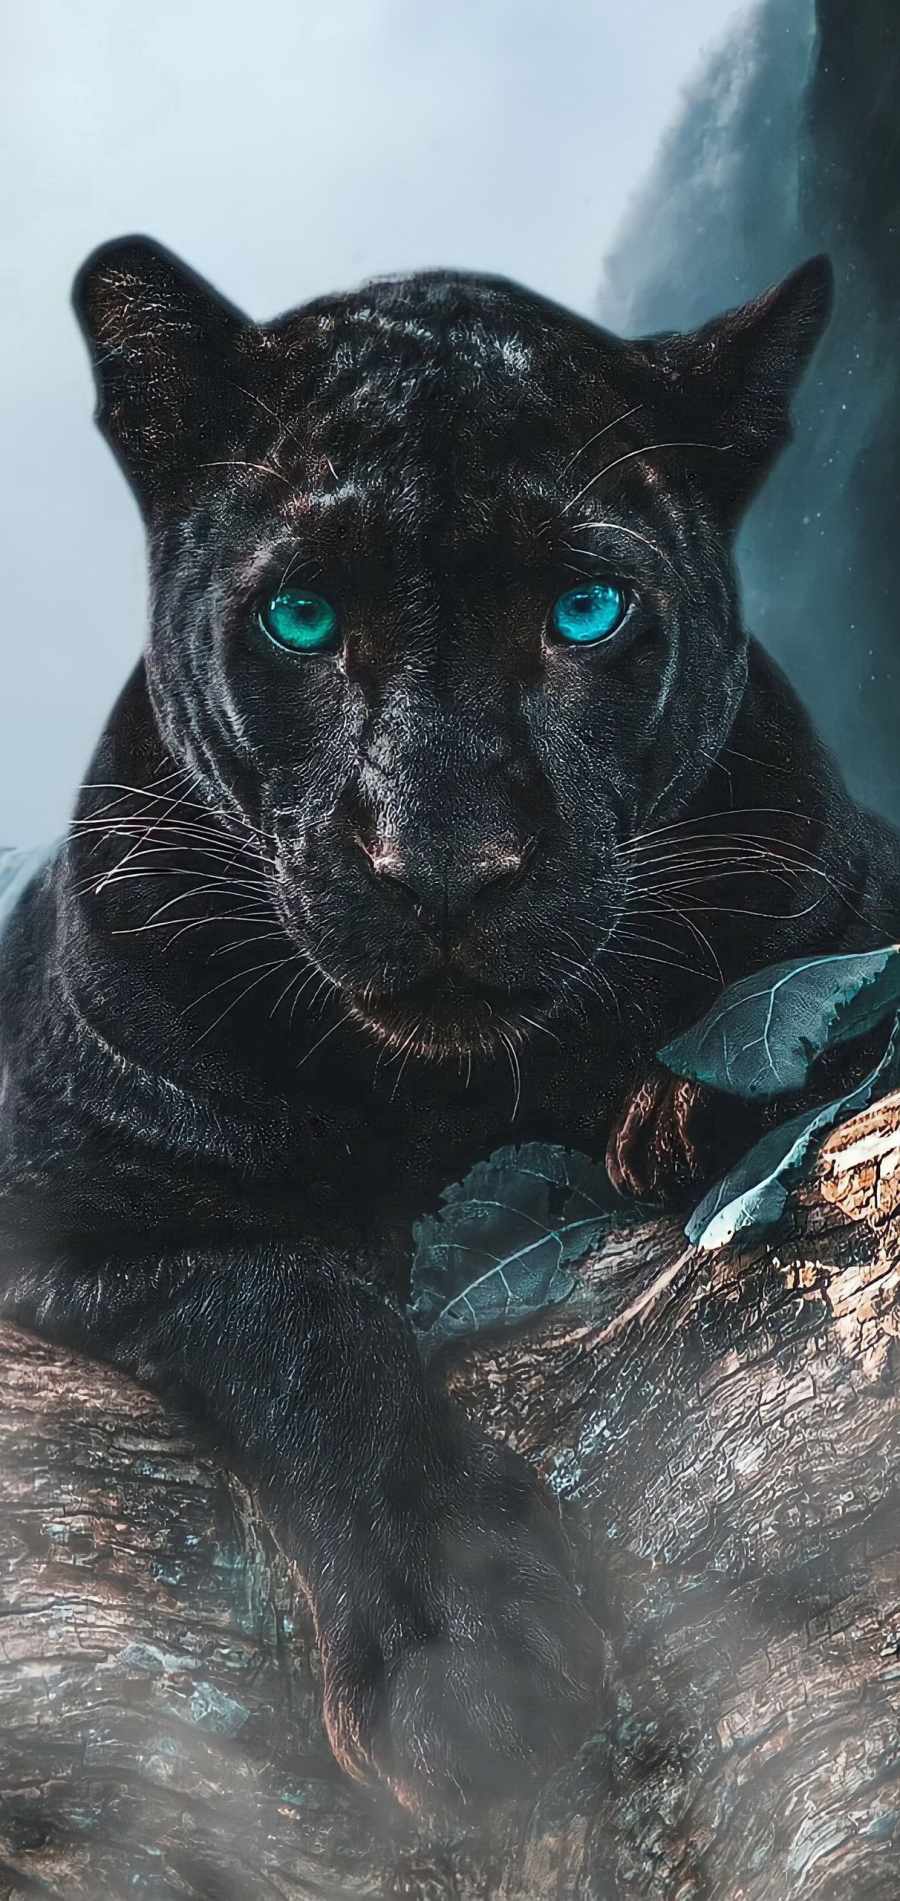 Panther Iphone Wallpapers